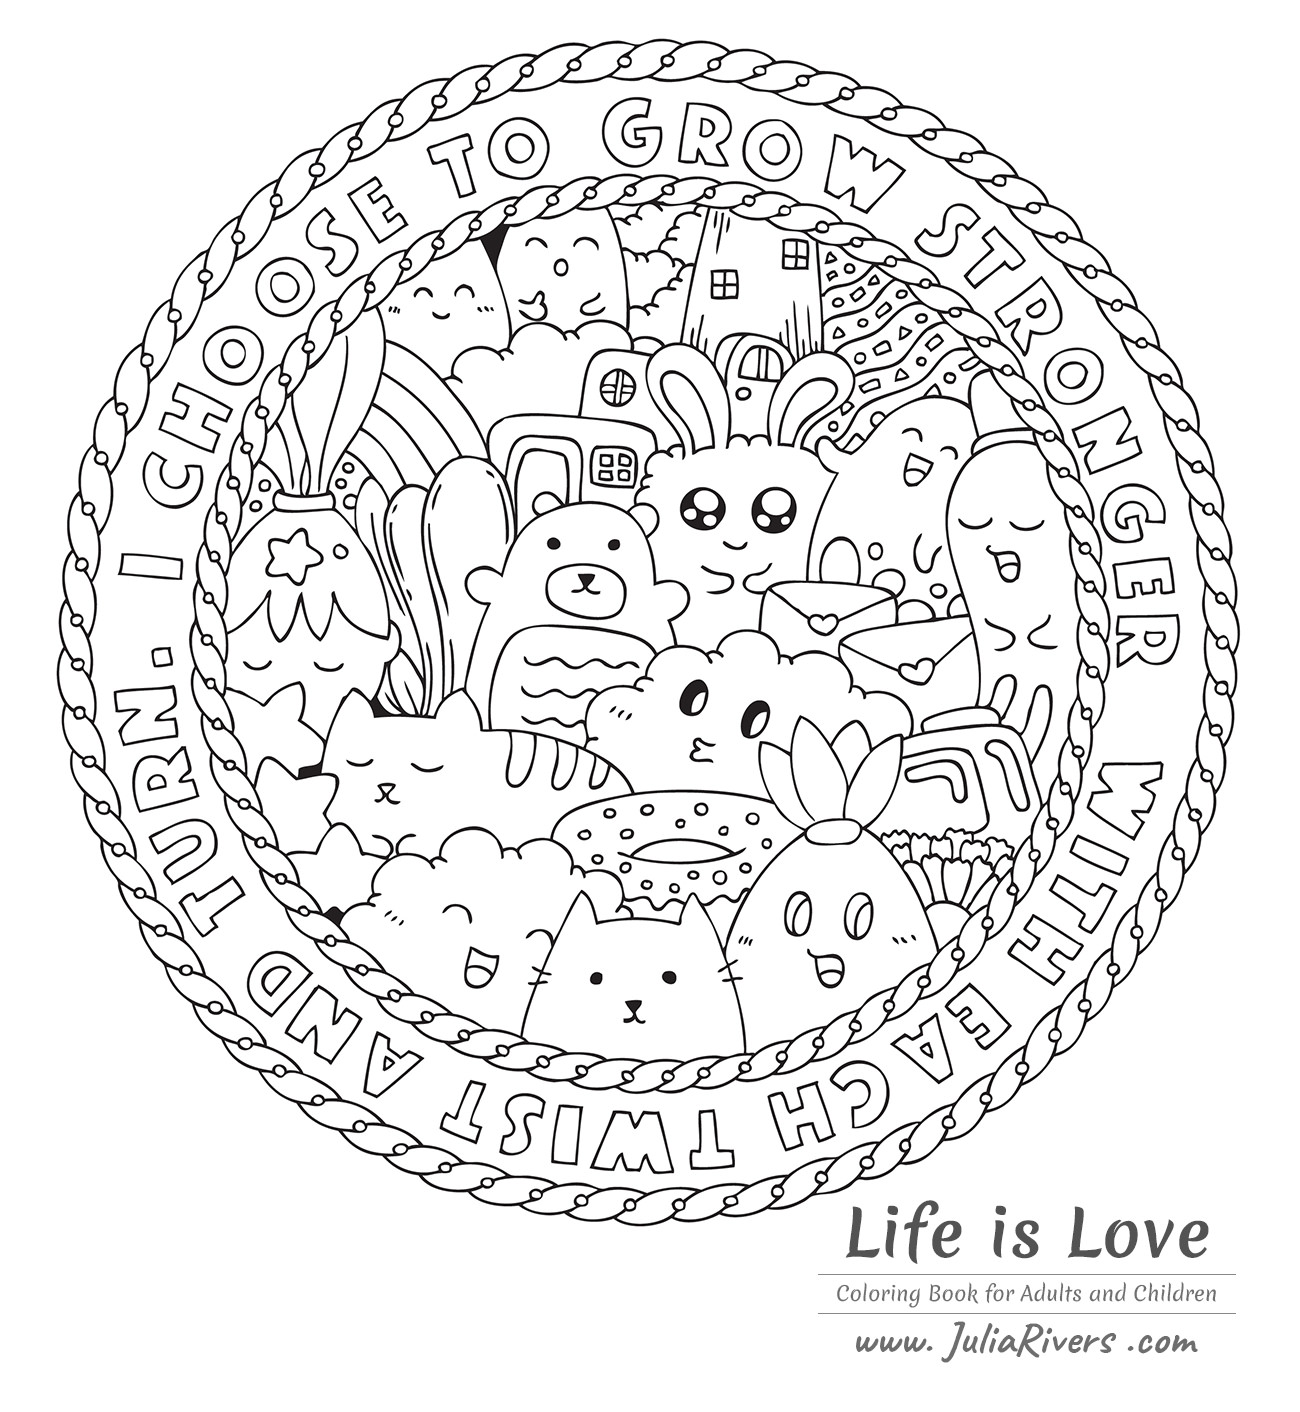 'Life is love' : Beautiful coloring page full of funny Kawaii characters : cats, bears, rabbits ... and even a Donut :), Artist : Julia Rivers